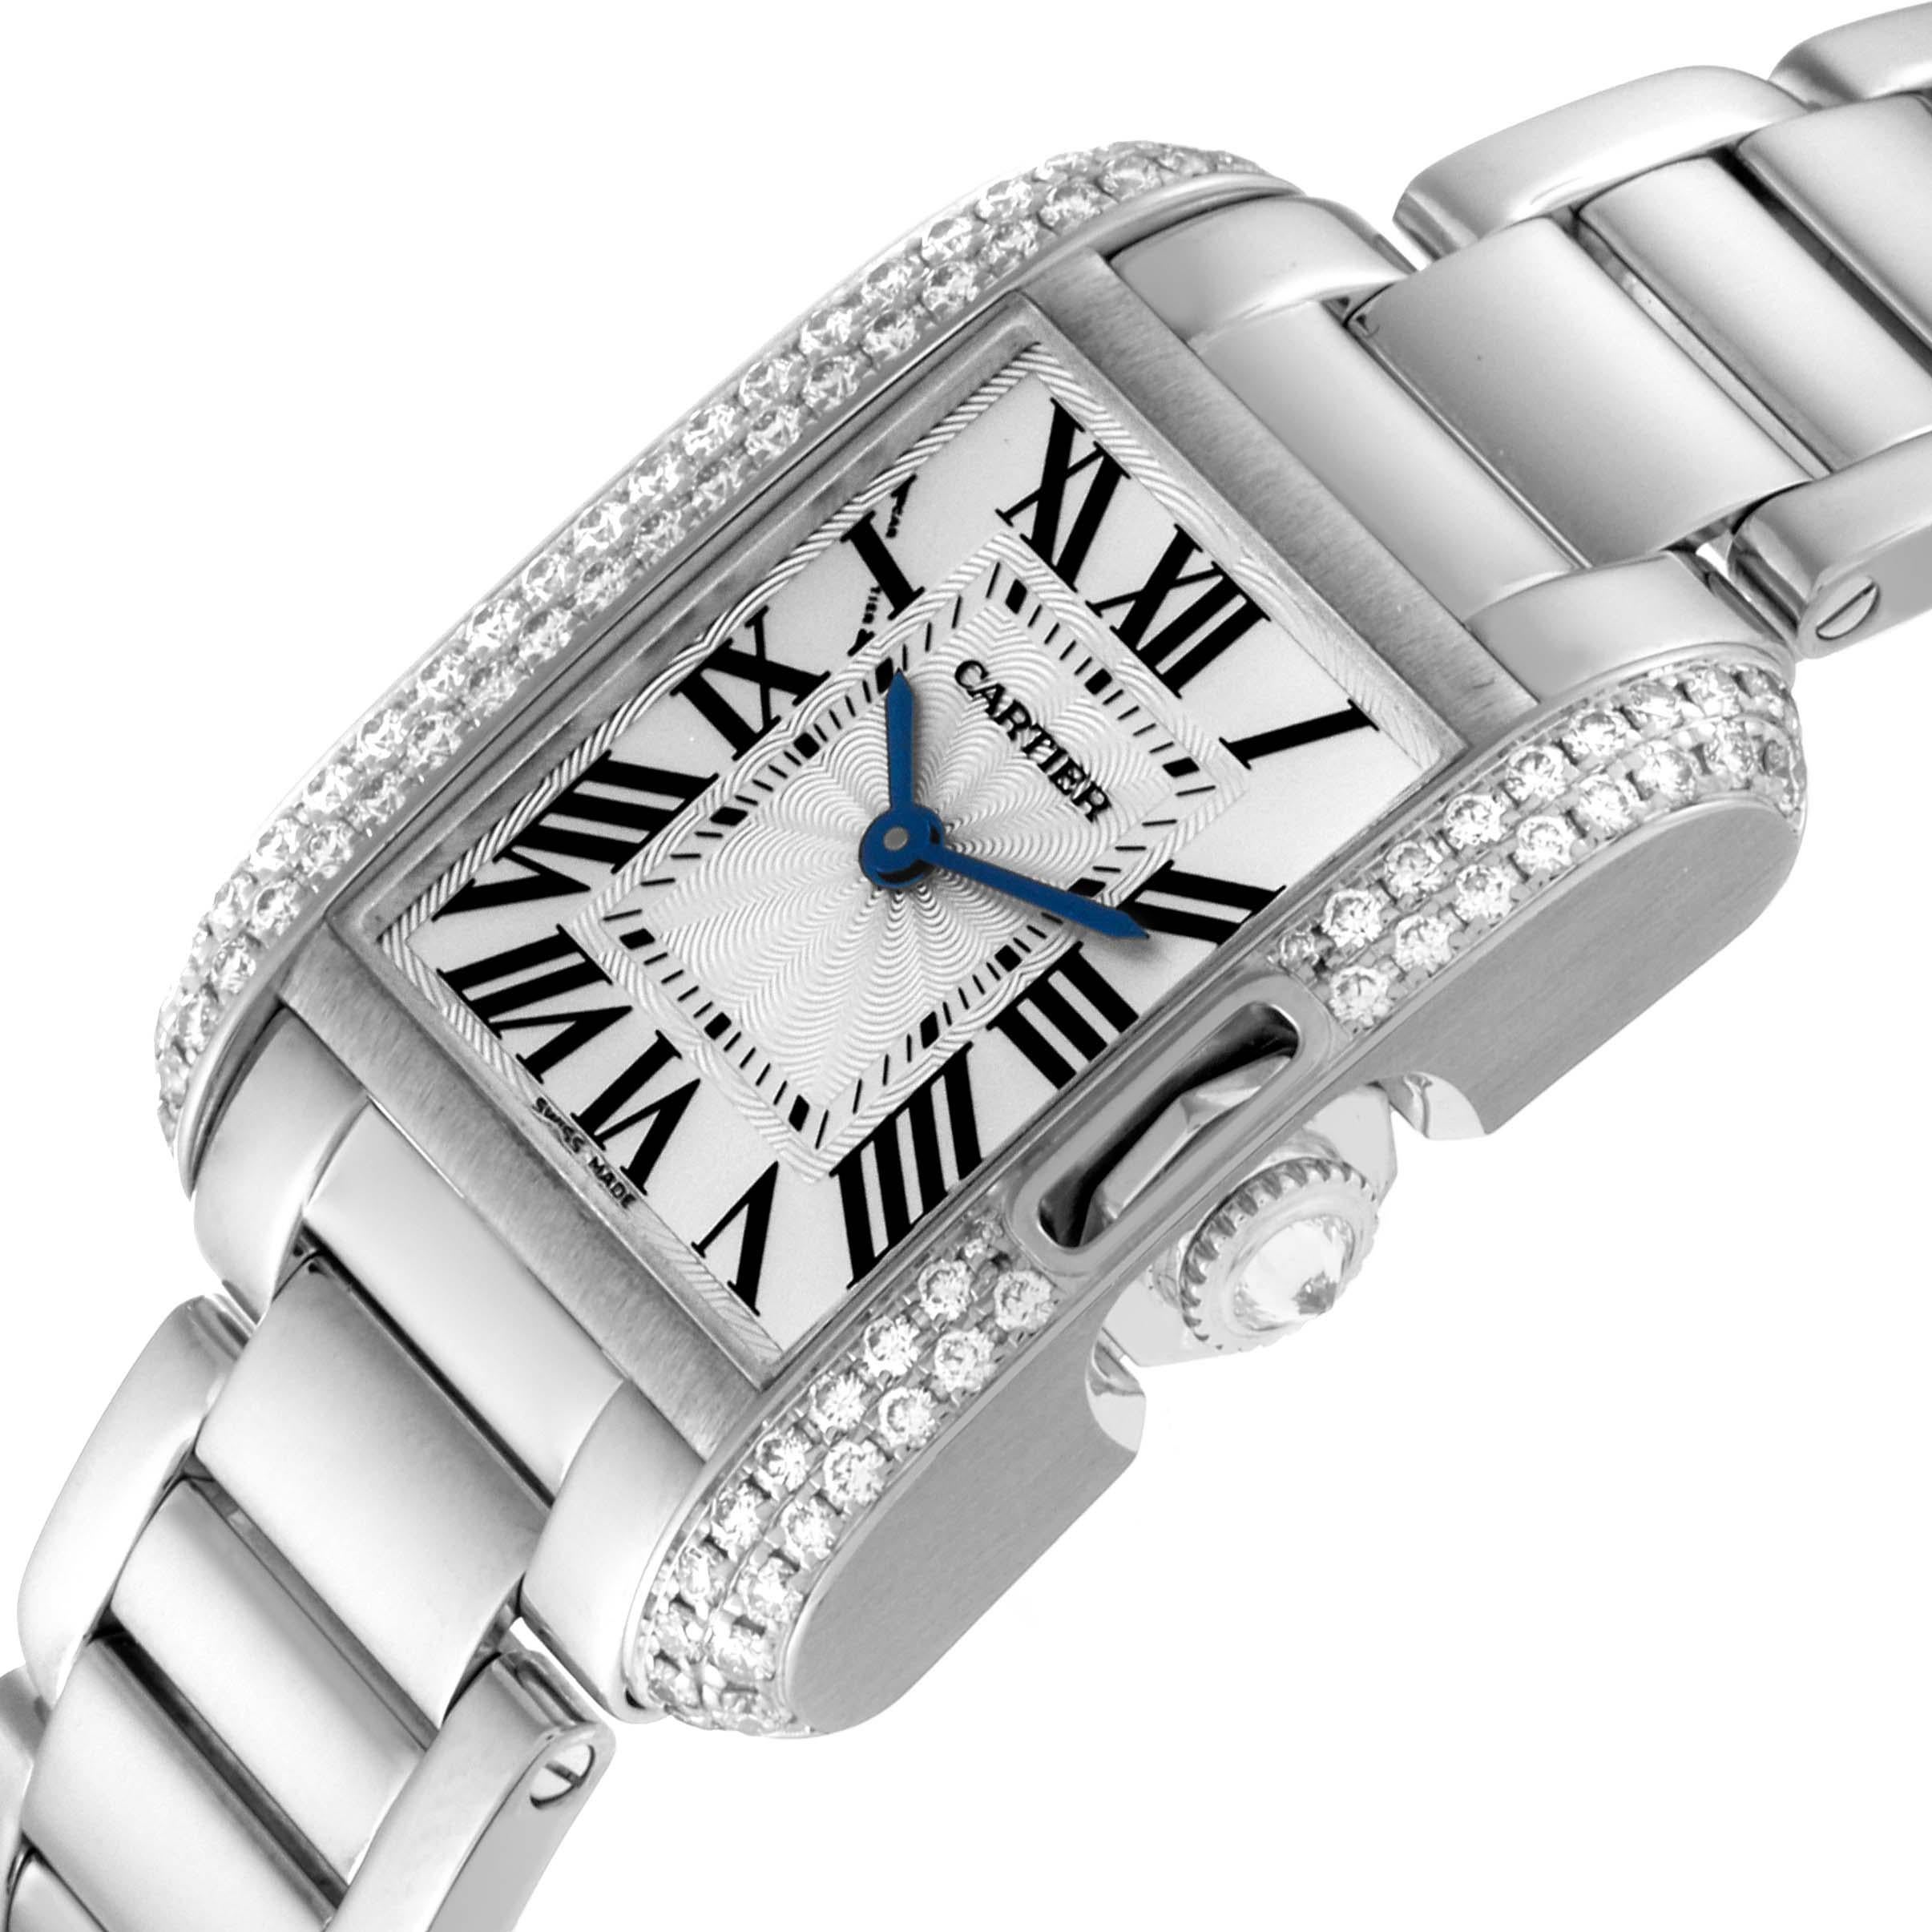 Cartier Tank Anglaise White Gold Diamond Ladies Watch WT100008 For Sale 3